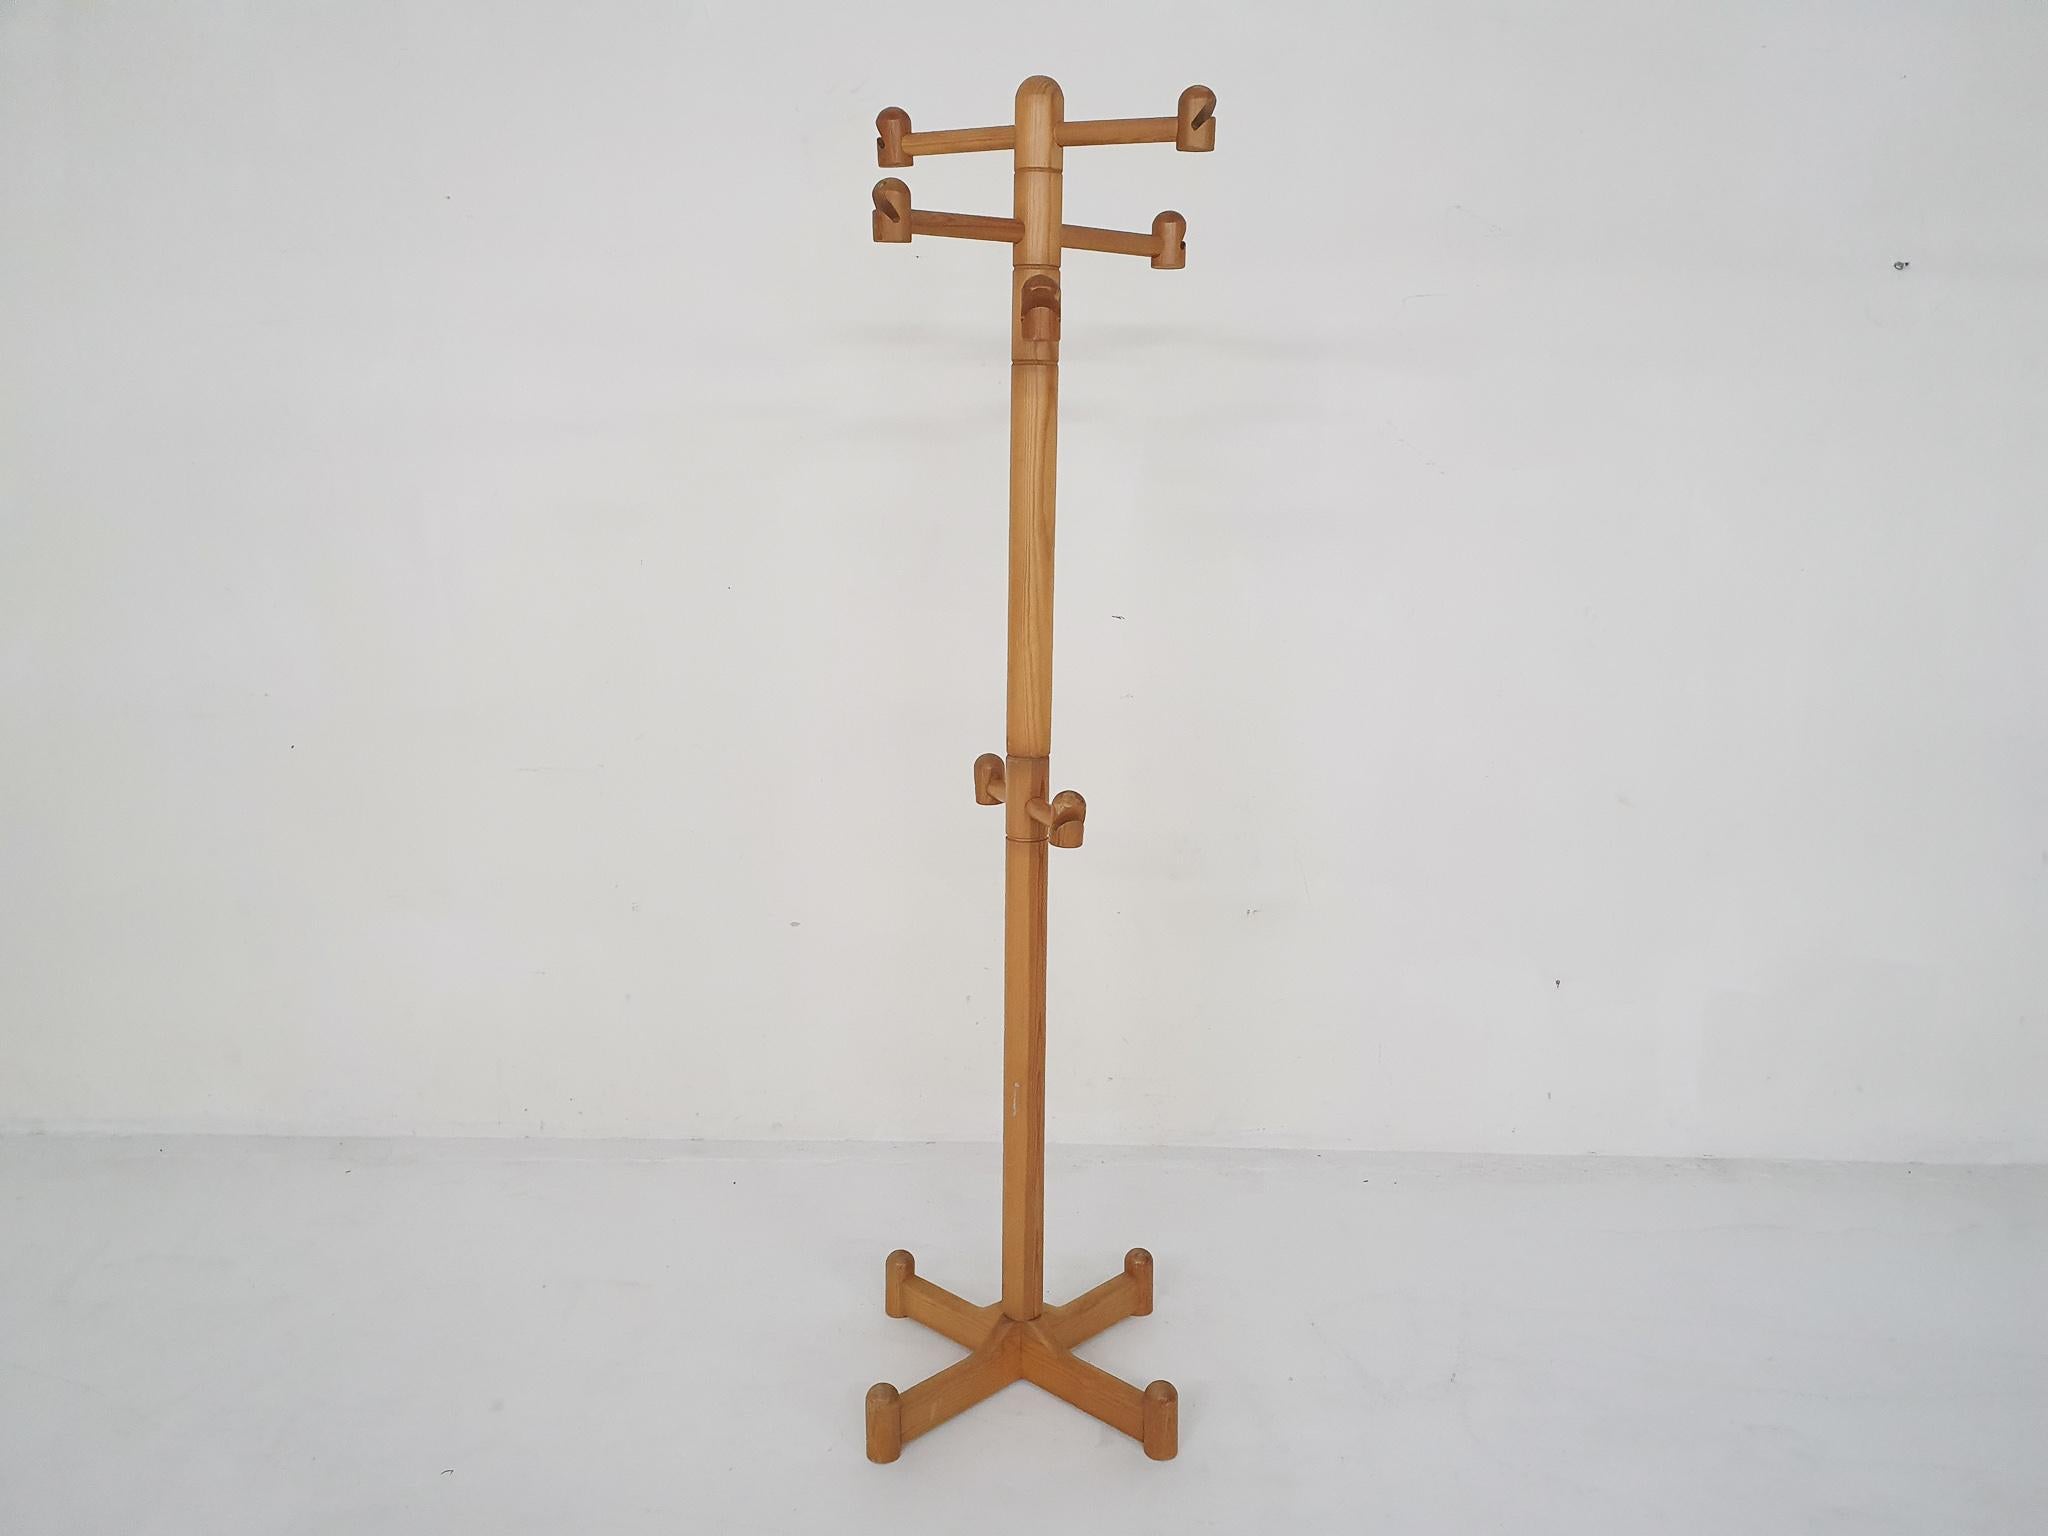 Free standing coatrack in pinewood with eight hooks to hang your coat.
The rack can be disassembled